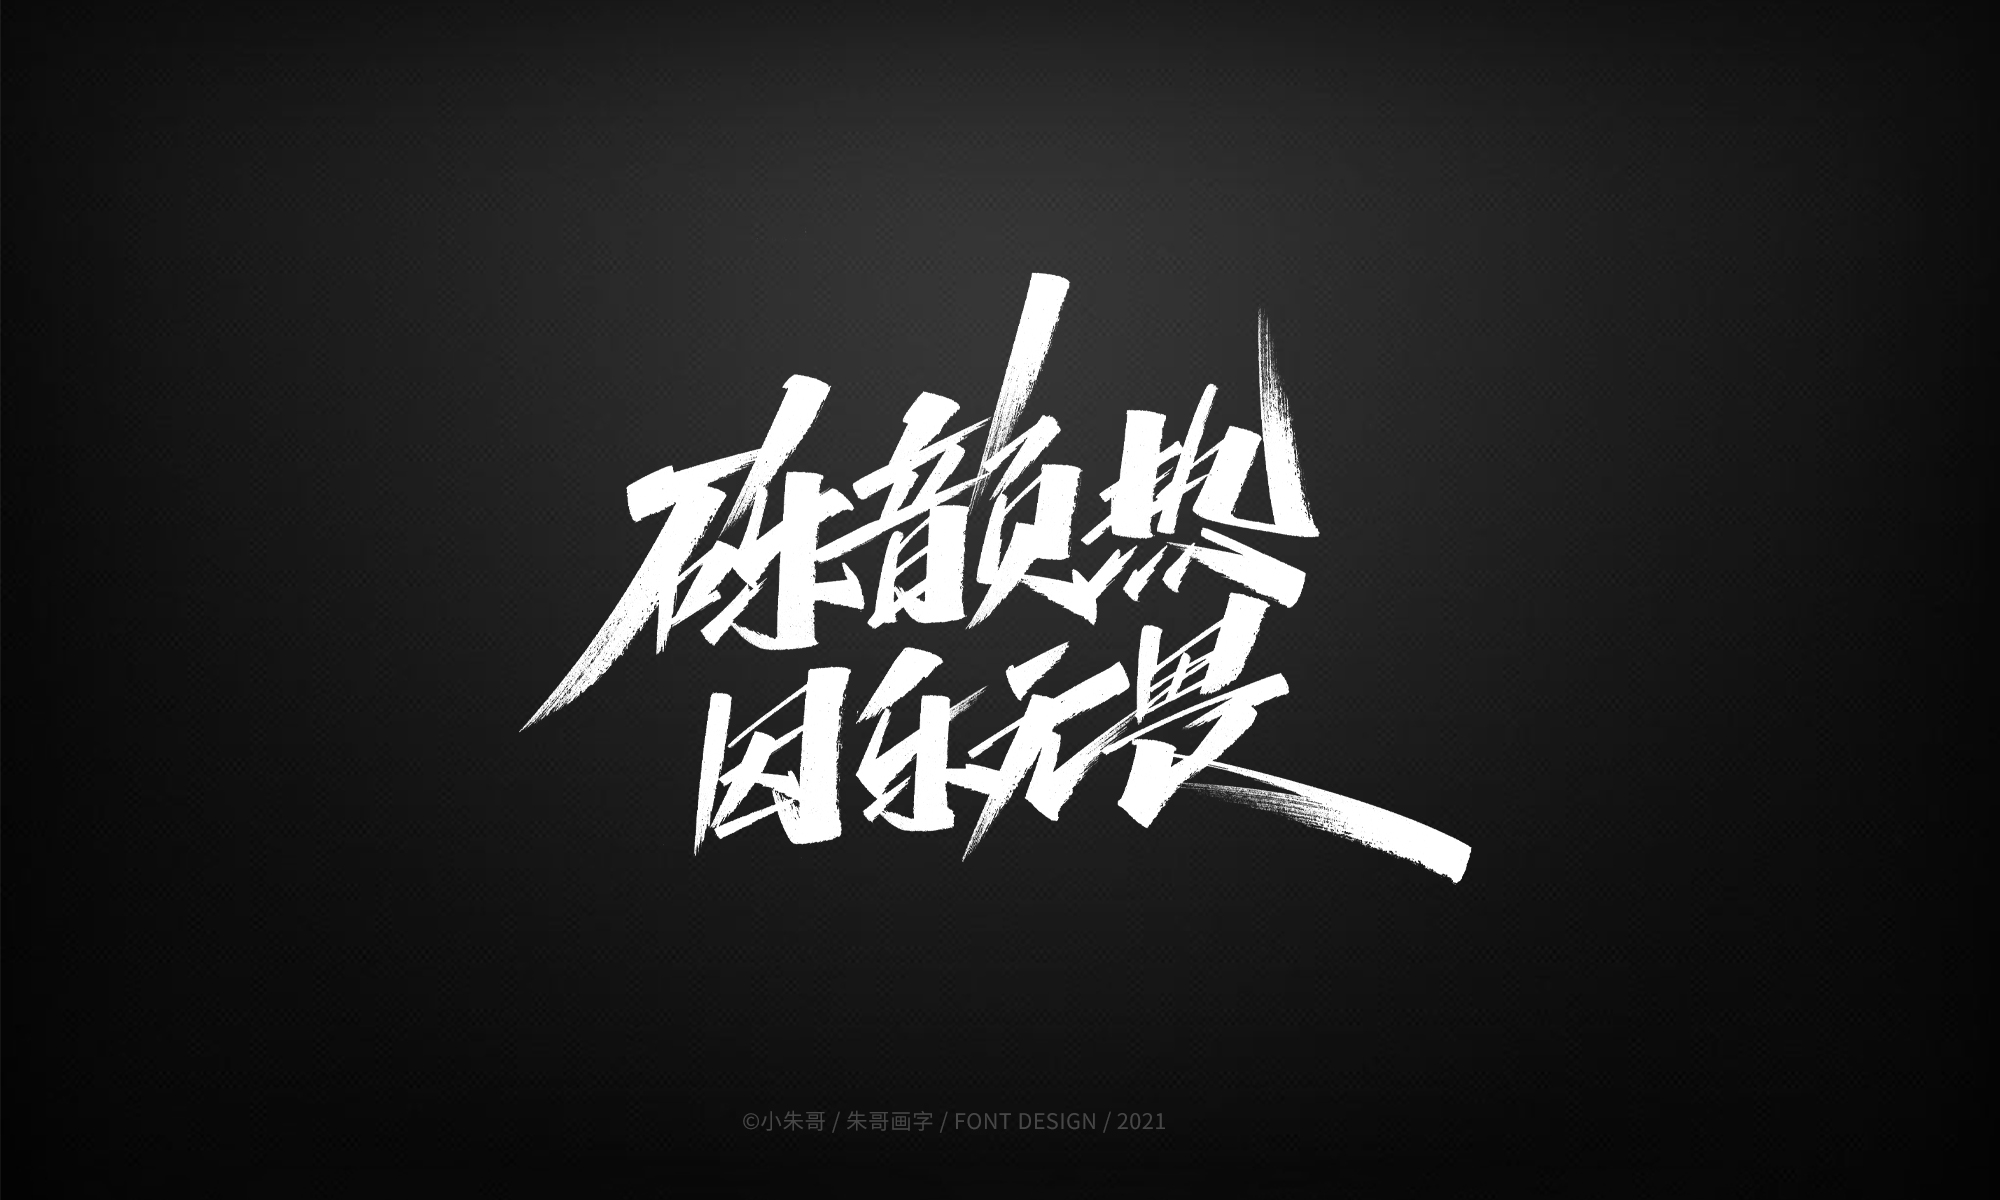 21P Collection of the latest Chinese font design schemes in 2021 #.74